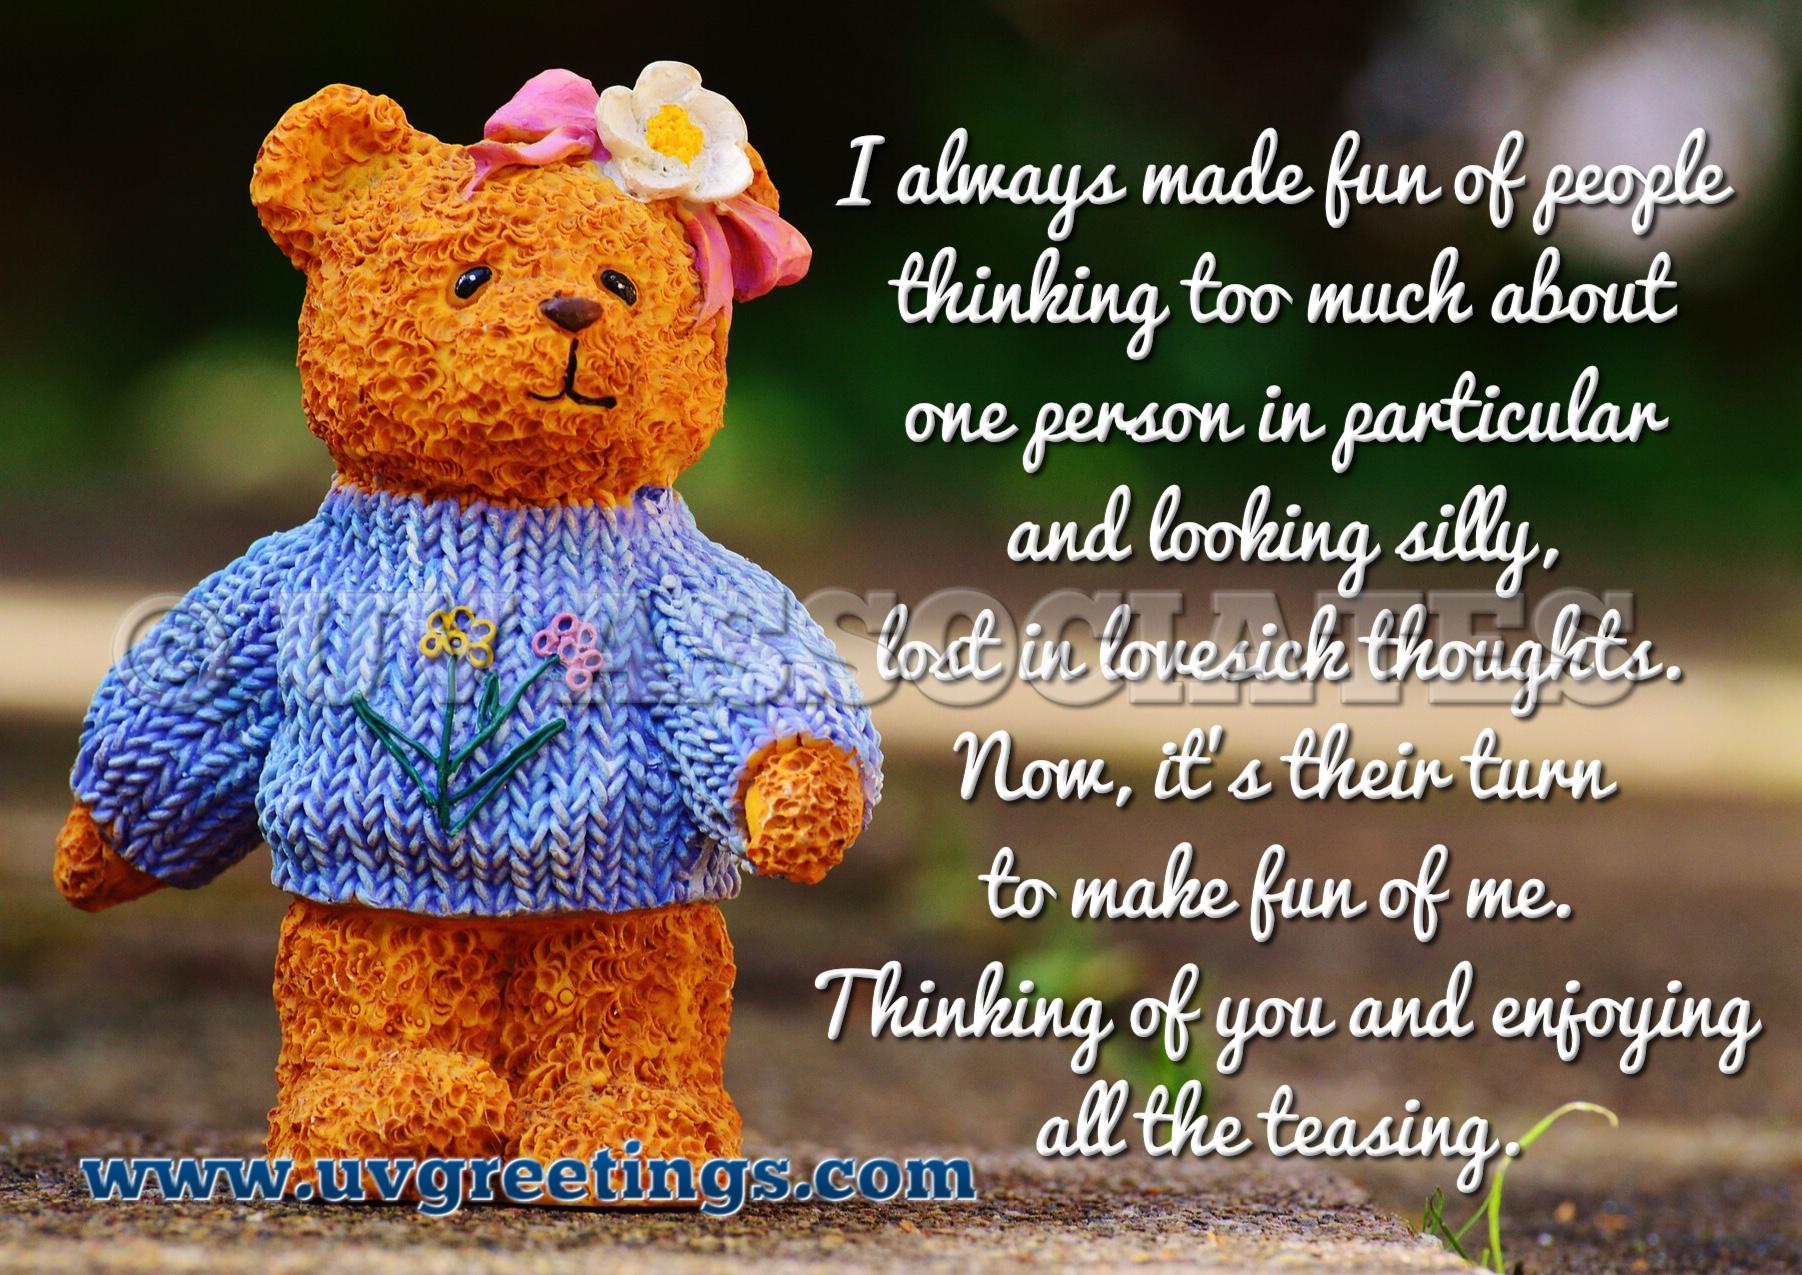 29 Thinking of you Messages - Romantic Poems, Inspiring ...